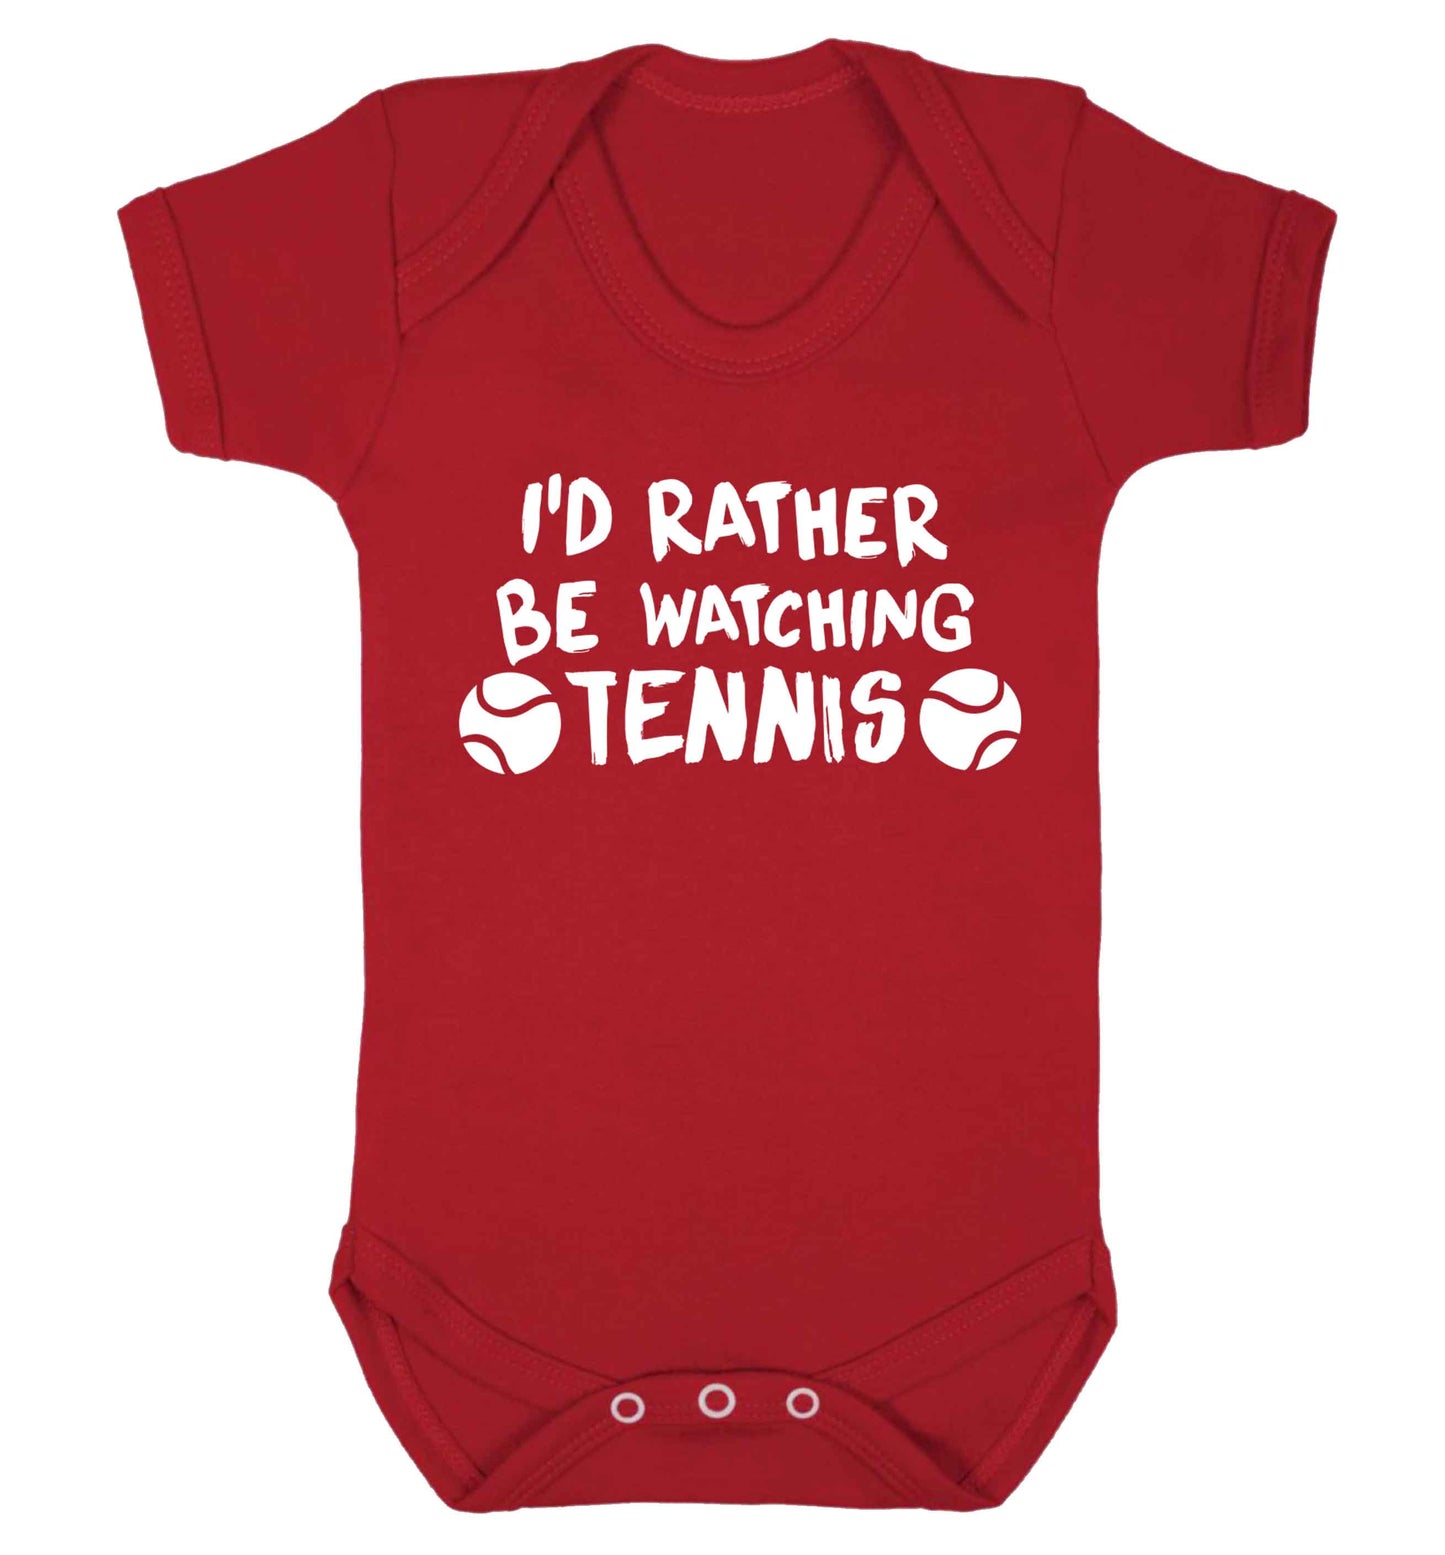 I'd rather be watching the tennis Baby Vest red 18-24 months